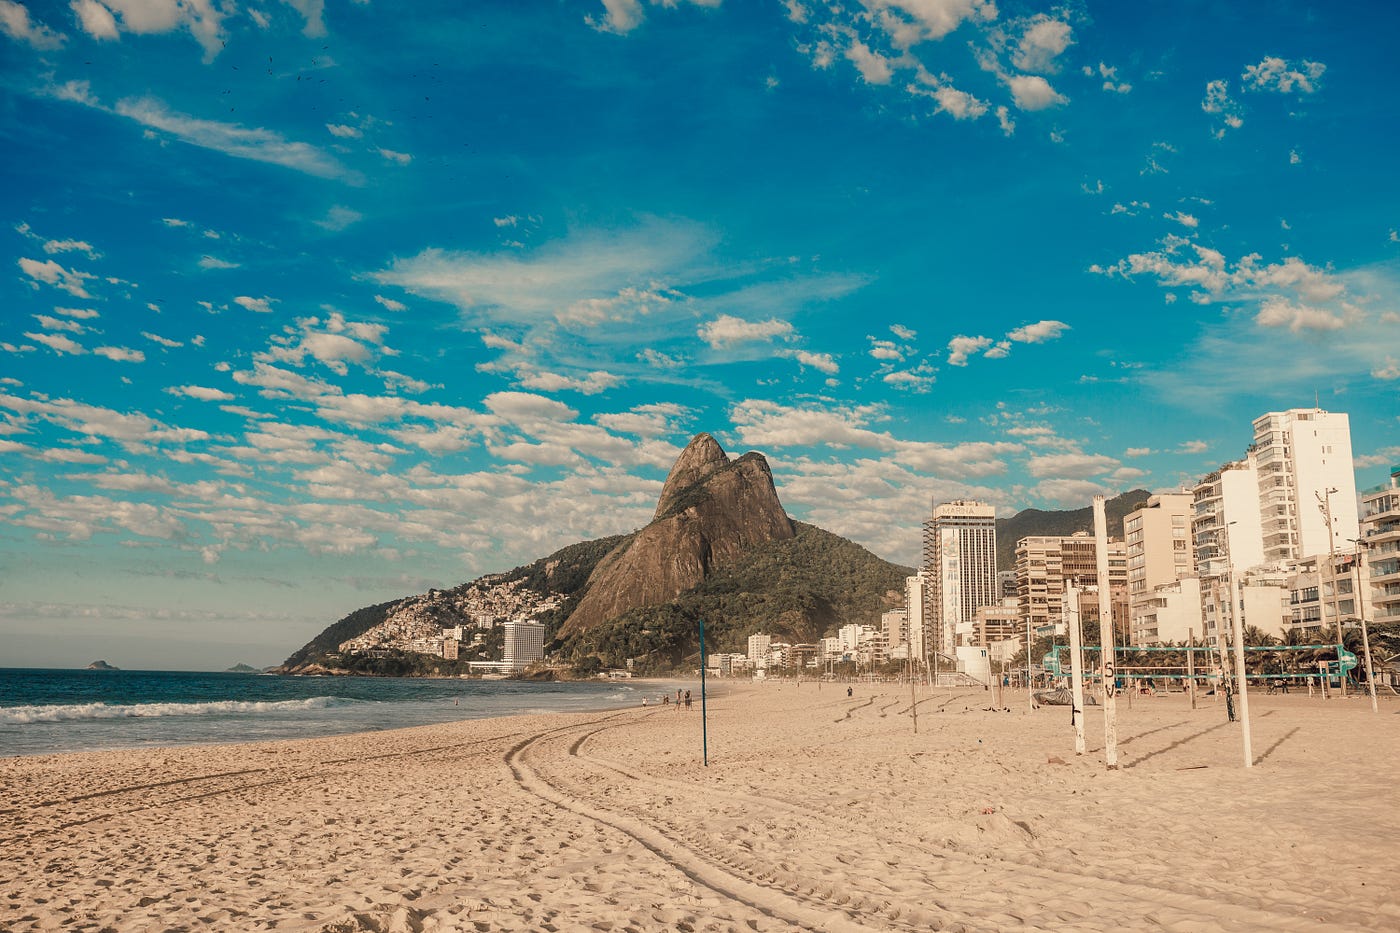 The Perfect Beach. I am standing on Rio de Janeiro's…, by jess1201icaa